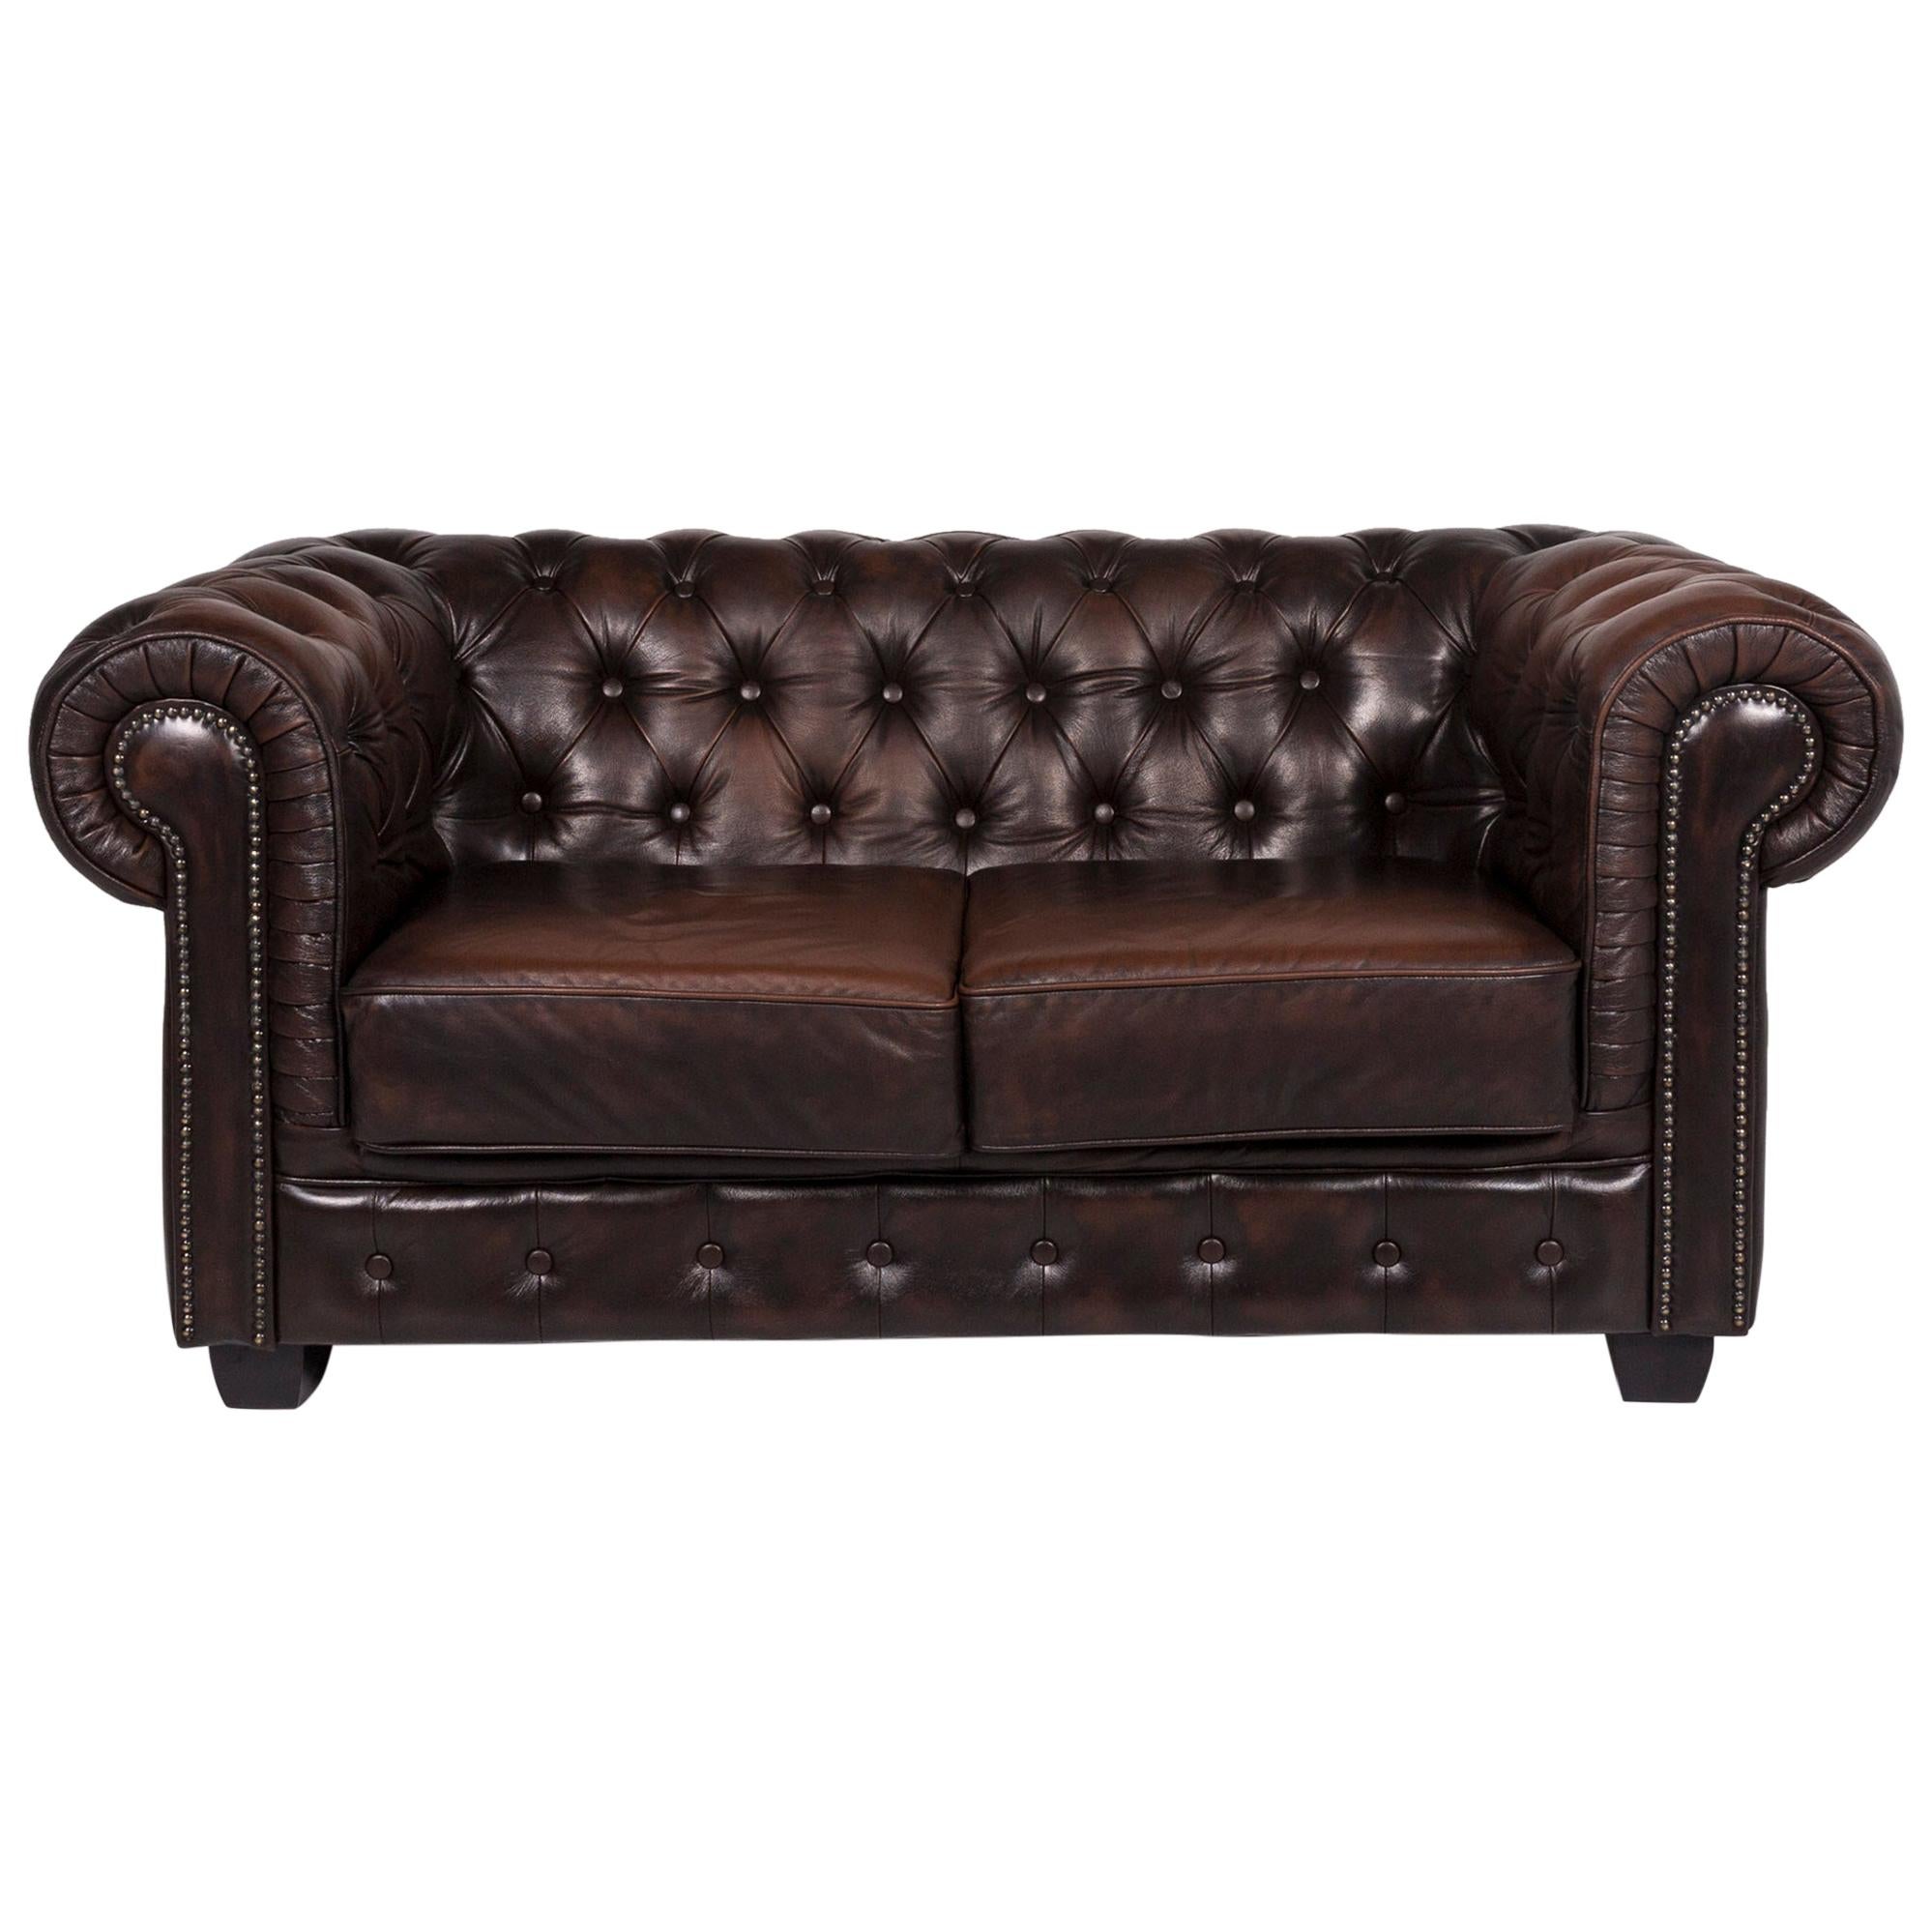 Chesterfield Leather Sofa Brown Dark Brown Two-Seat Retro Couch